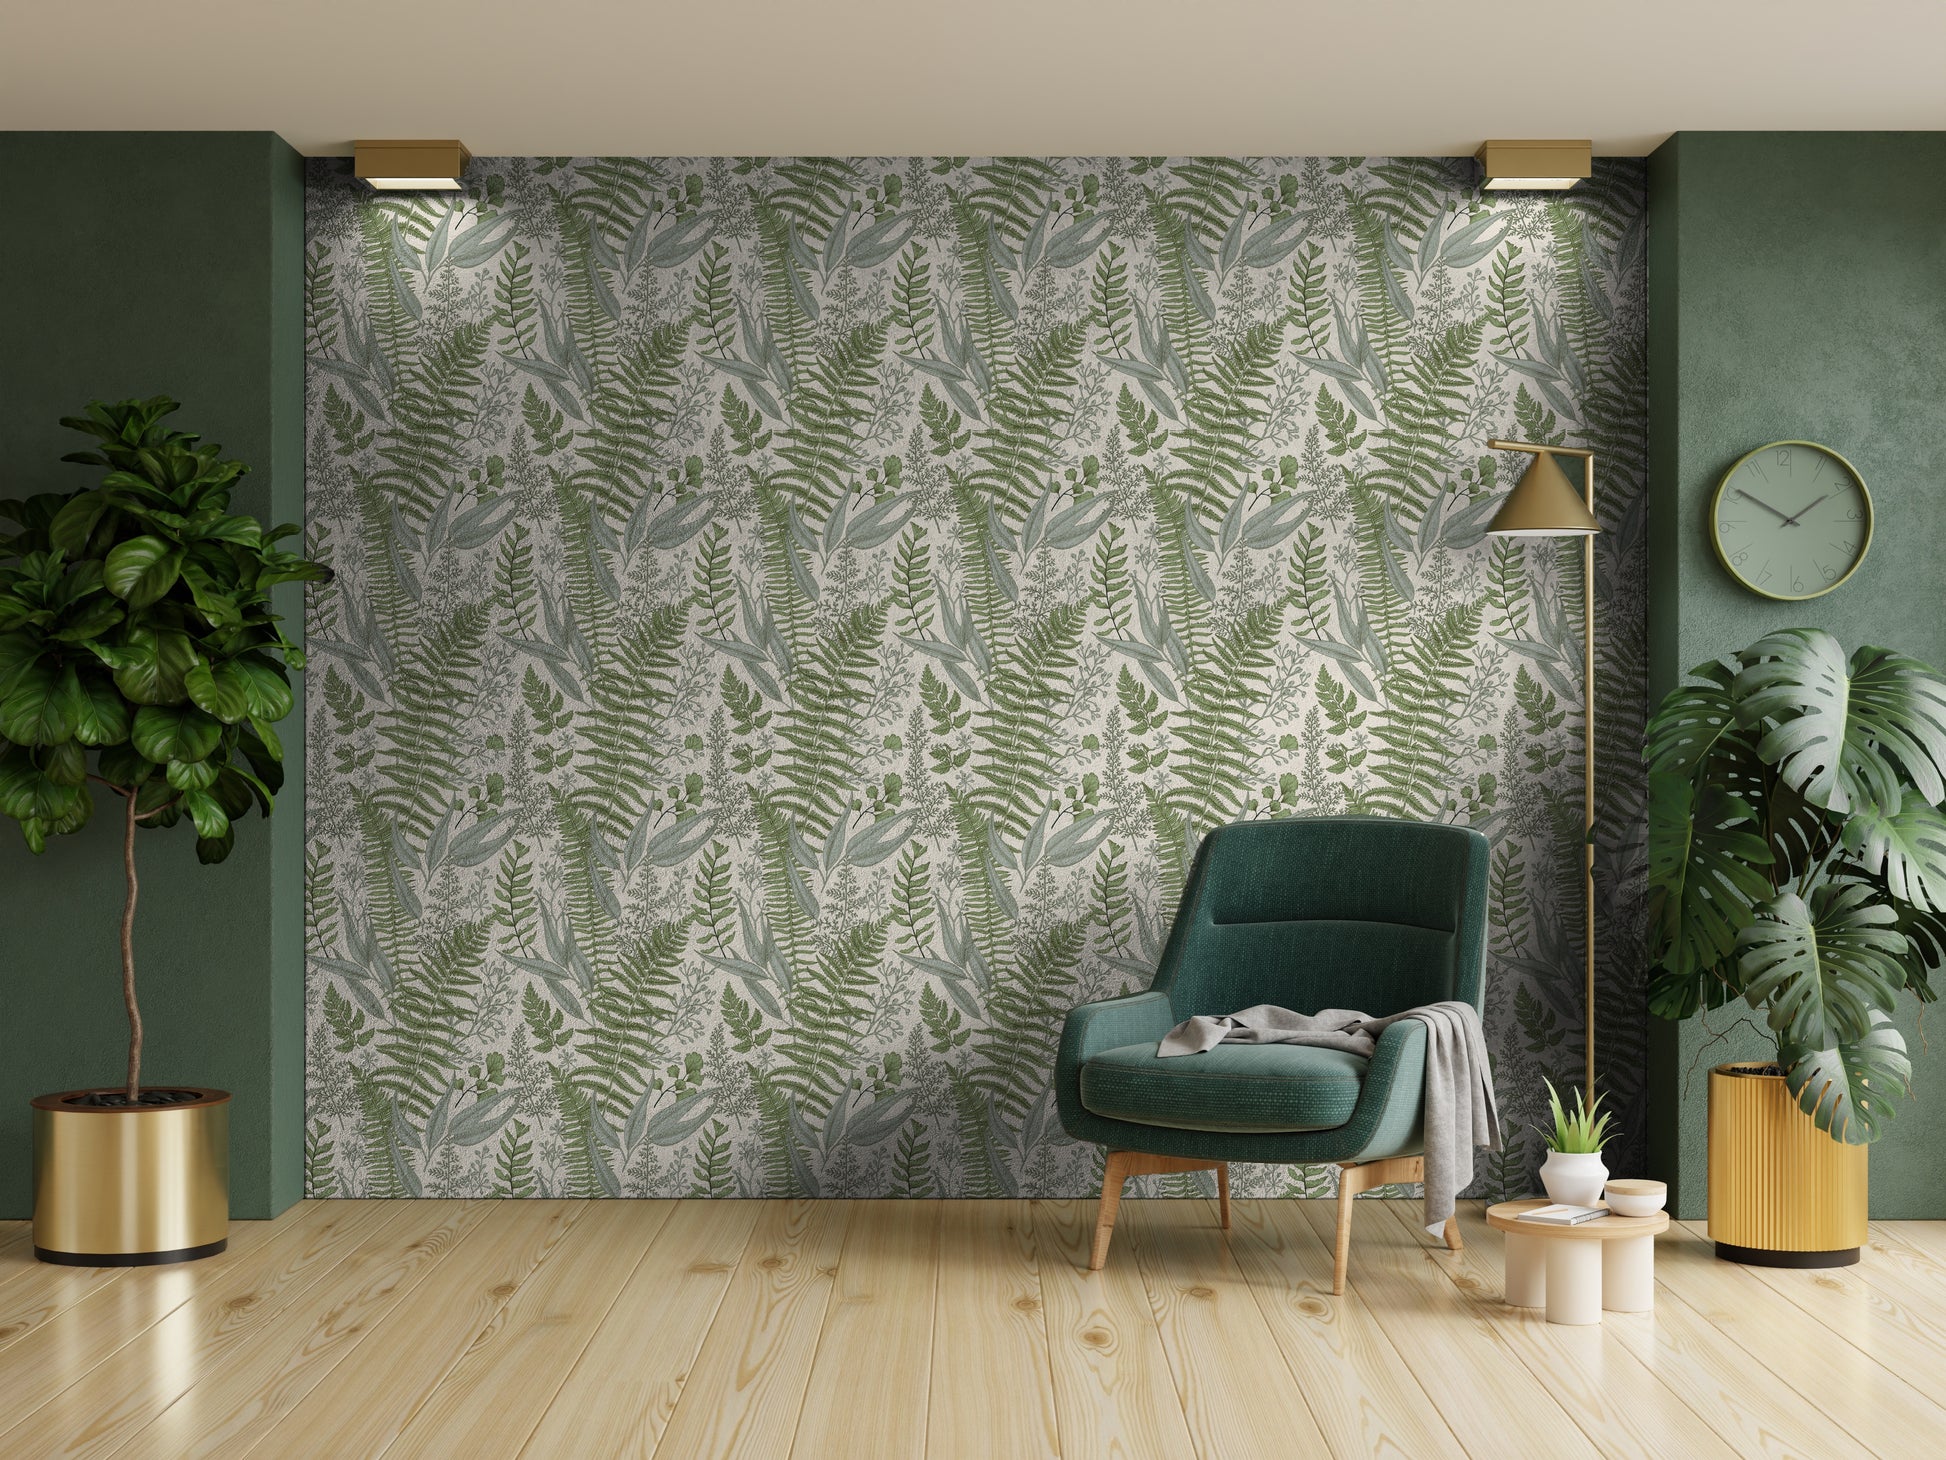 Floral print wallpaper next to green wall